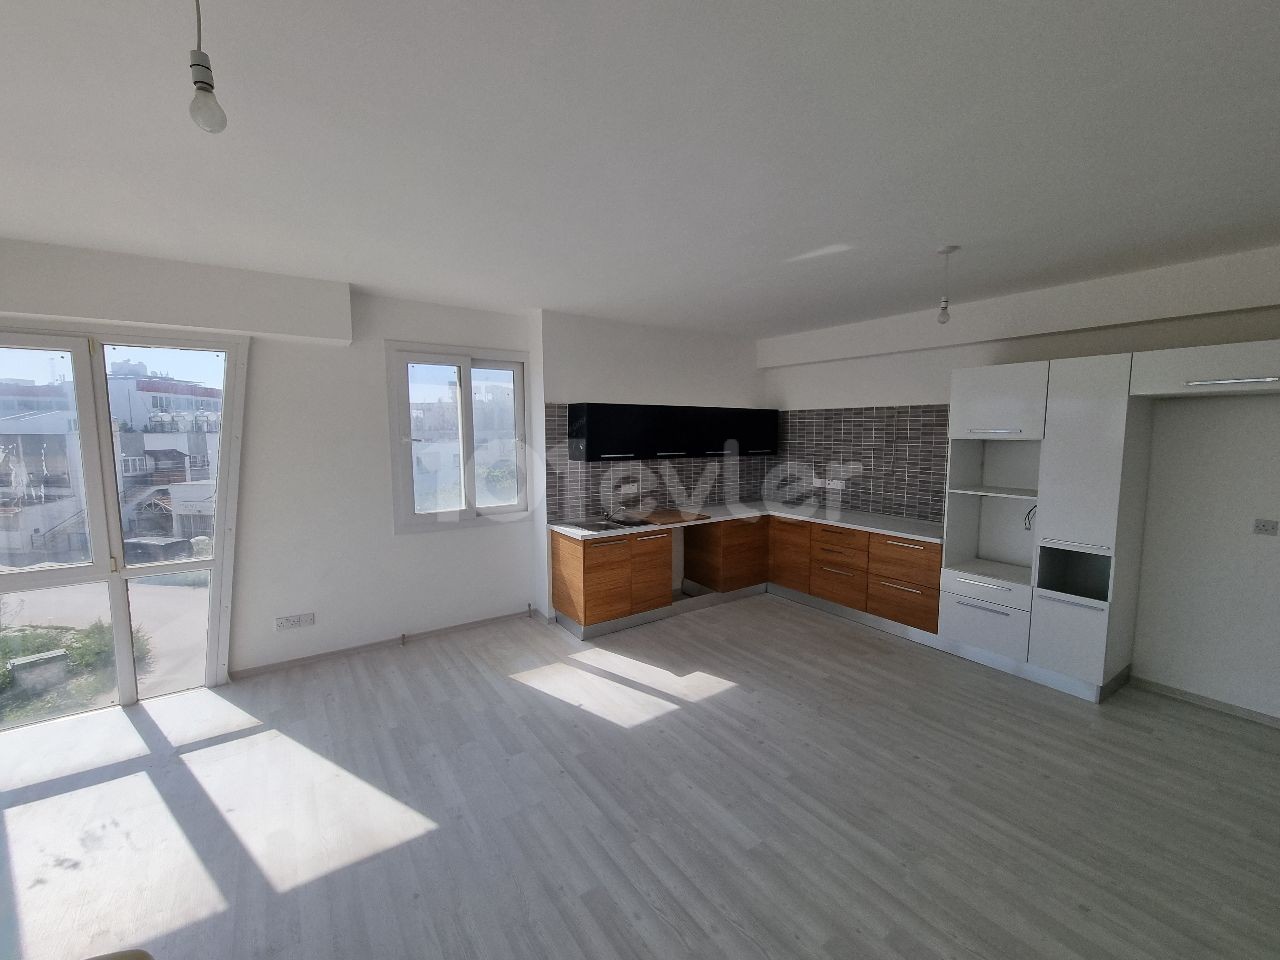 3 bedroom Turkish made flat in Gonyeli, close to the main street and markets